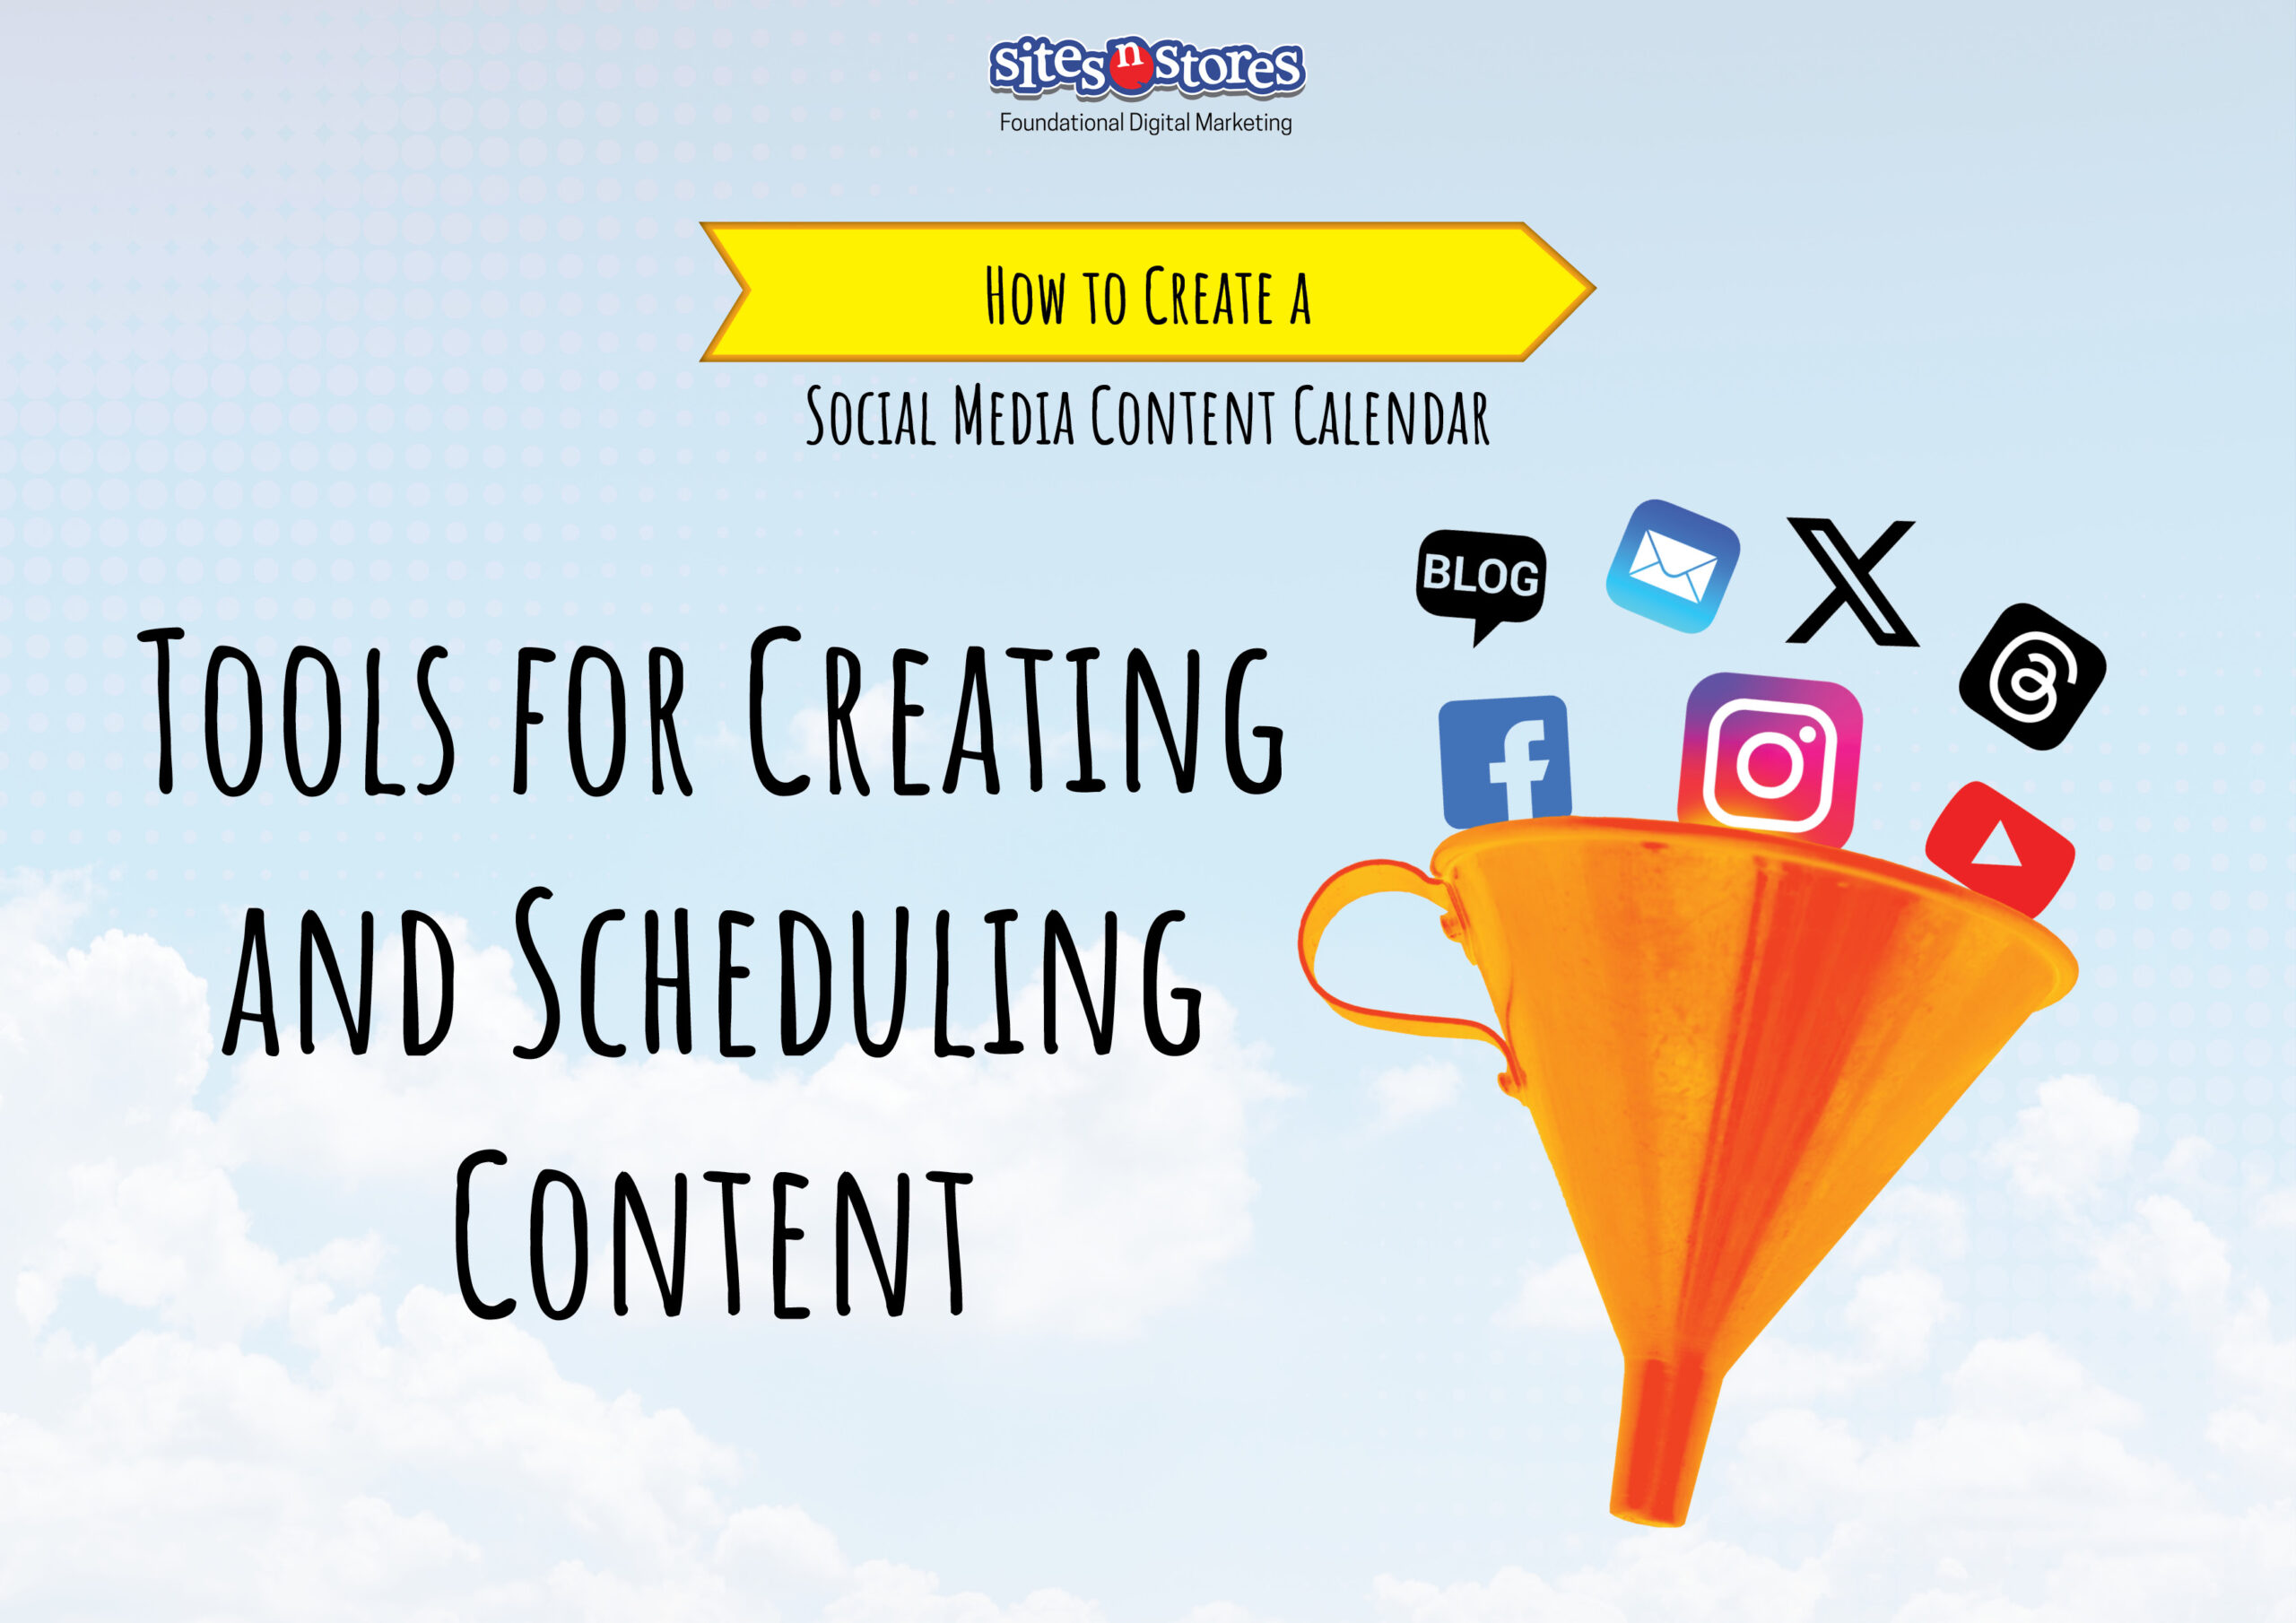 Tools for Creating and Scheduling Content